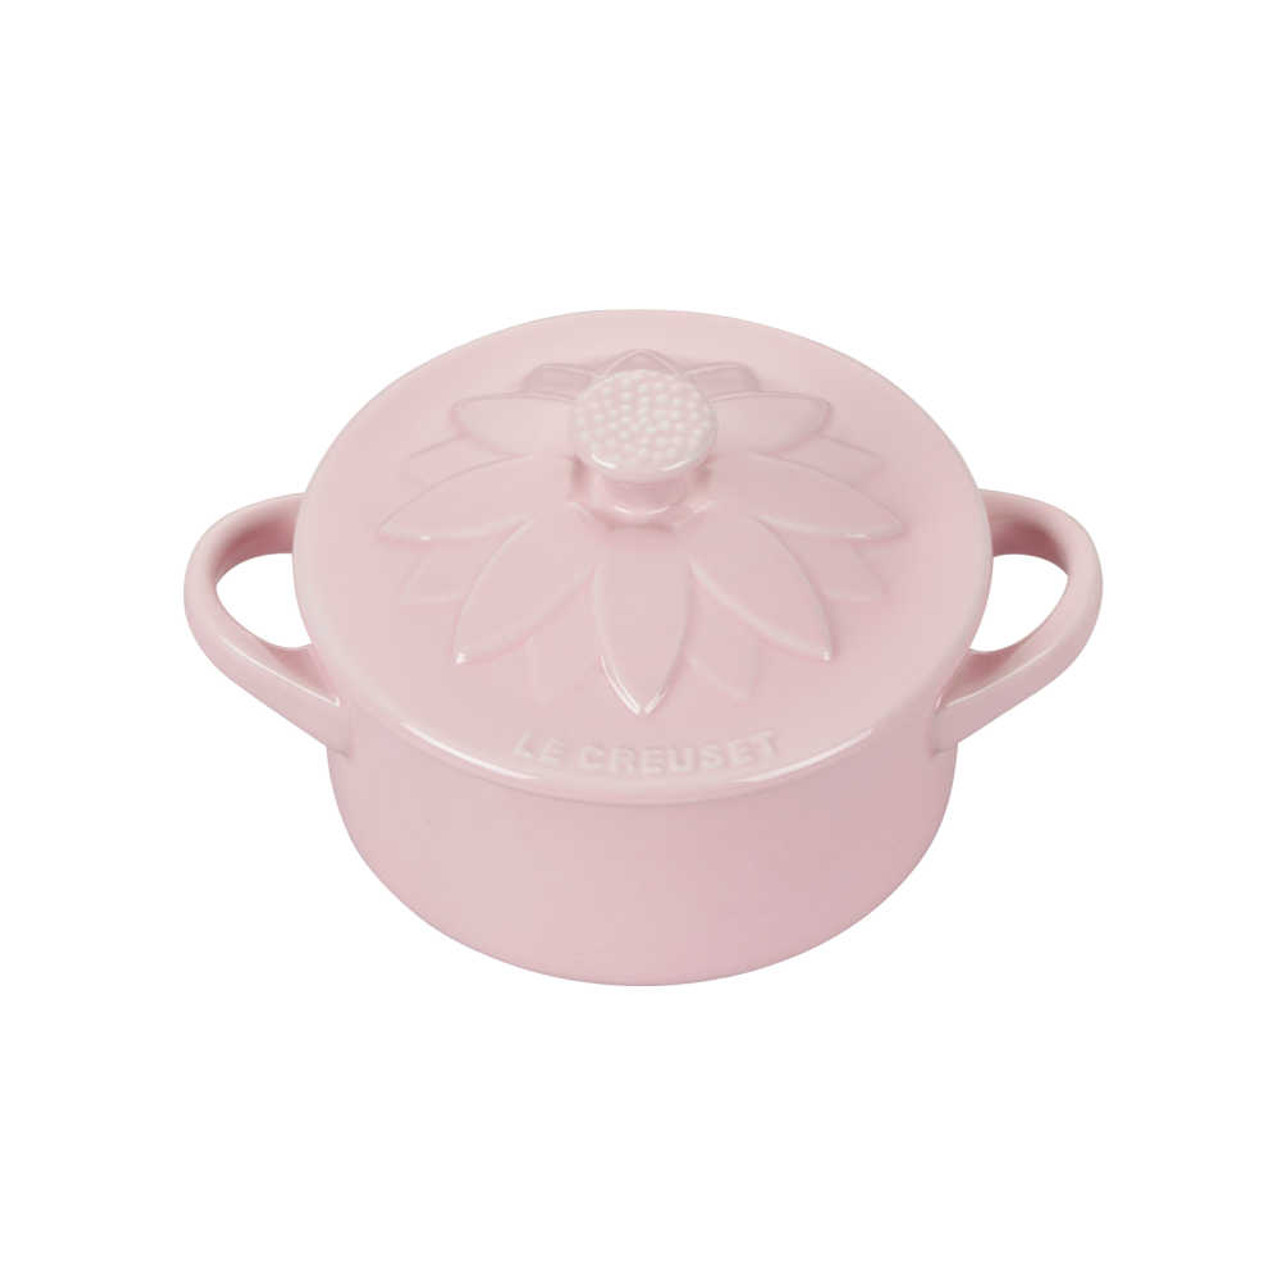 https://cdn11.bigcommerce.com/s-hccytny0od/images/stencil/1280x1280/products/4537/18153/Le_Creuset_Mini_Cocotte_With_Flower_Lid_in_Chiffon_Pink__80125.1646949325.jpg?c=2?imbypass=on